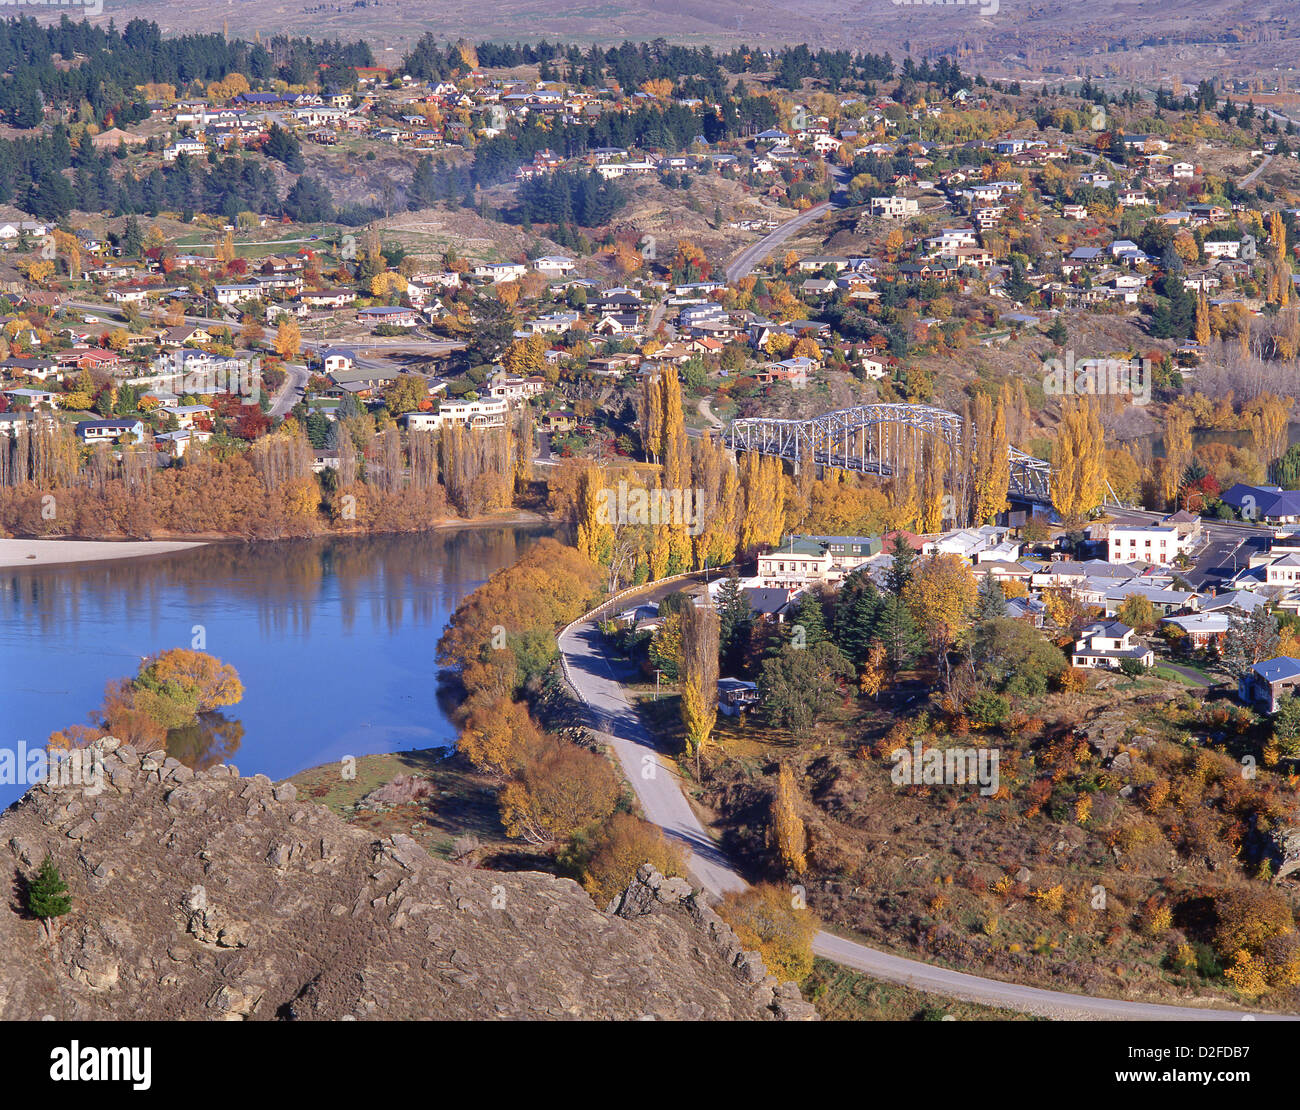 View of town and Clutha River in autumn colours, Alexandra, Central Otago District, Otago Region, South Island, New Zealand Stock Photo